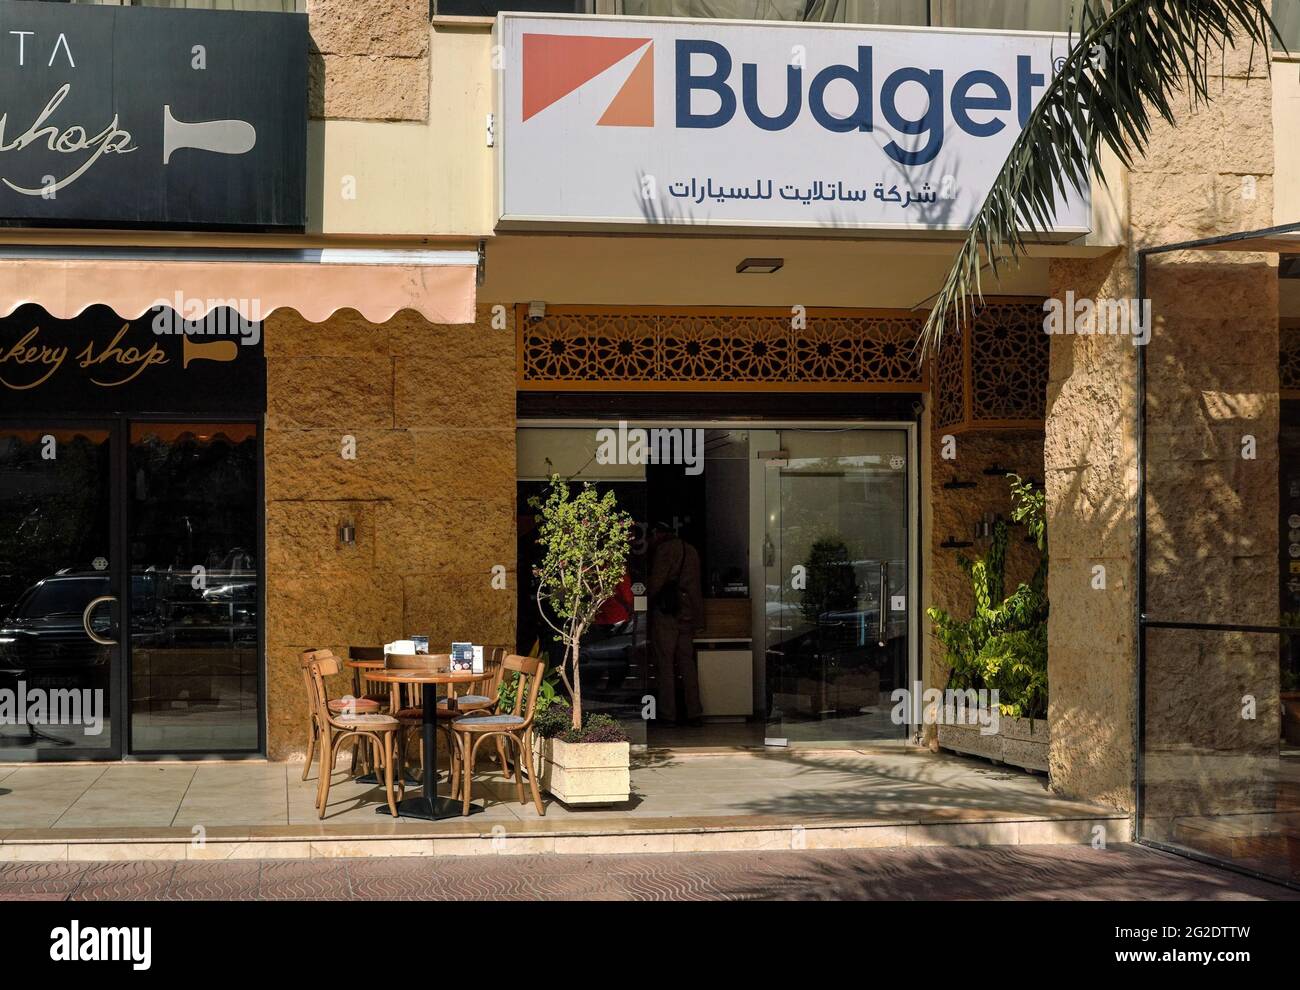 Aqaba, Jordan - January 21st, 2020: Budget logo with Arabic name below at entrance to one of their branches in Aqaba. It is American car rental compan Stock Photo